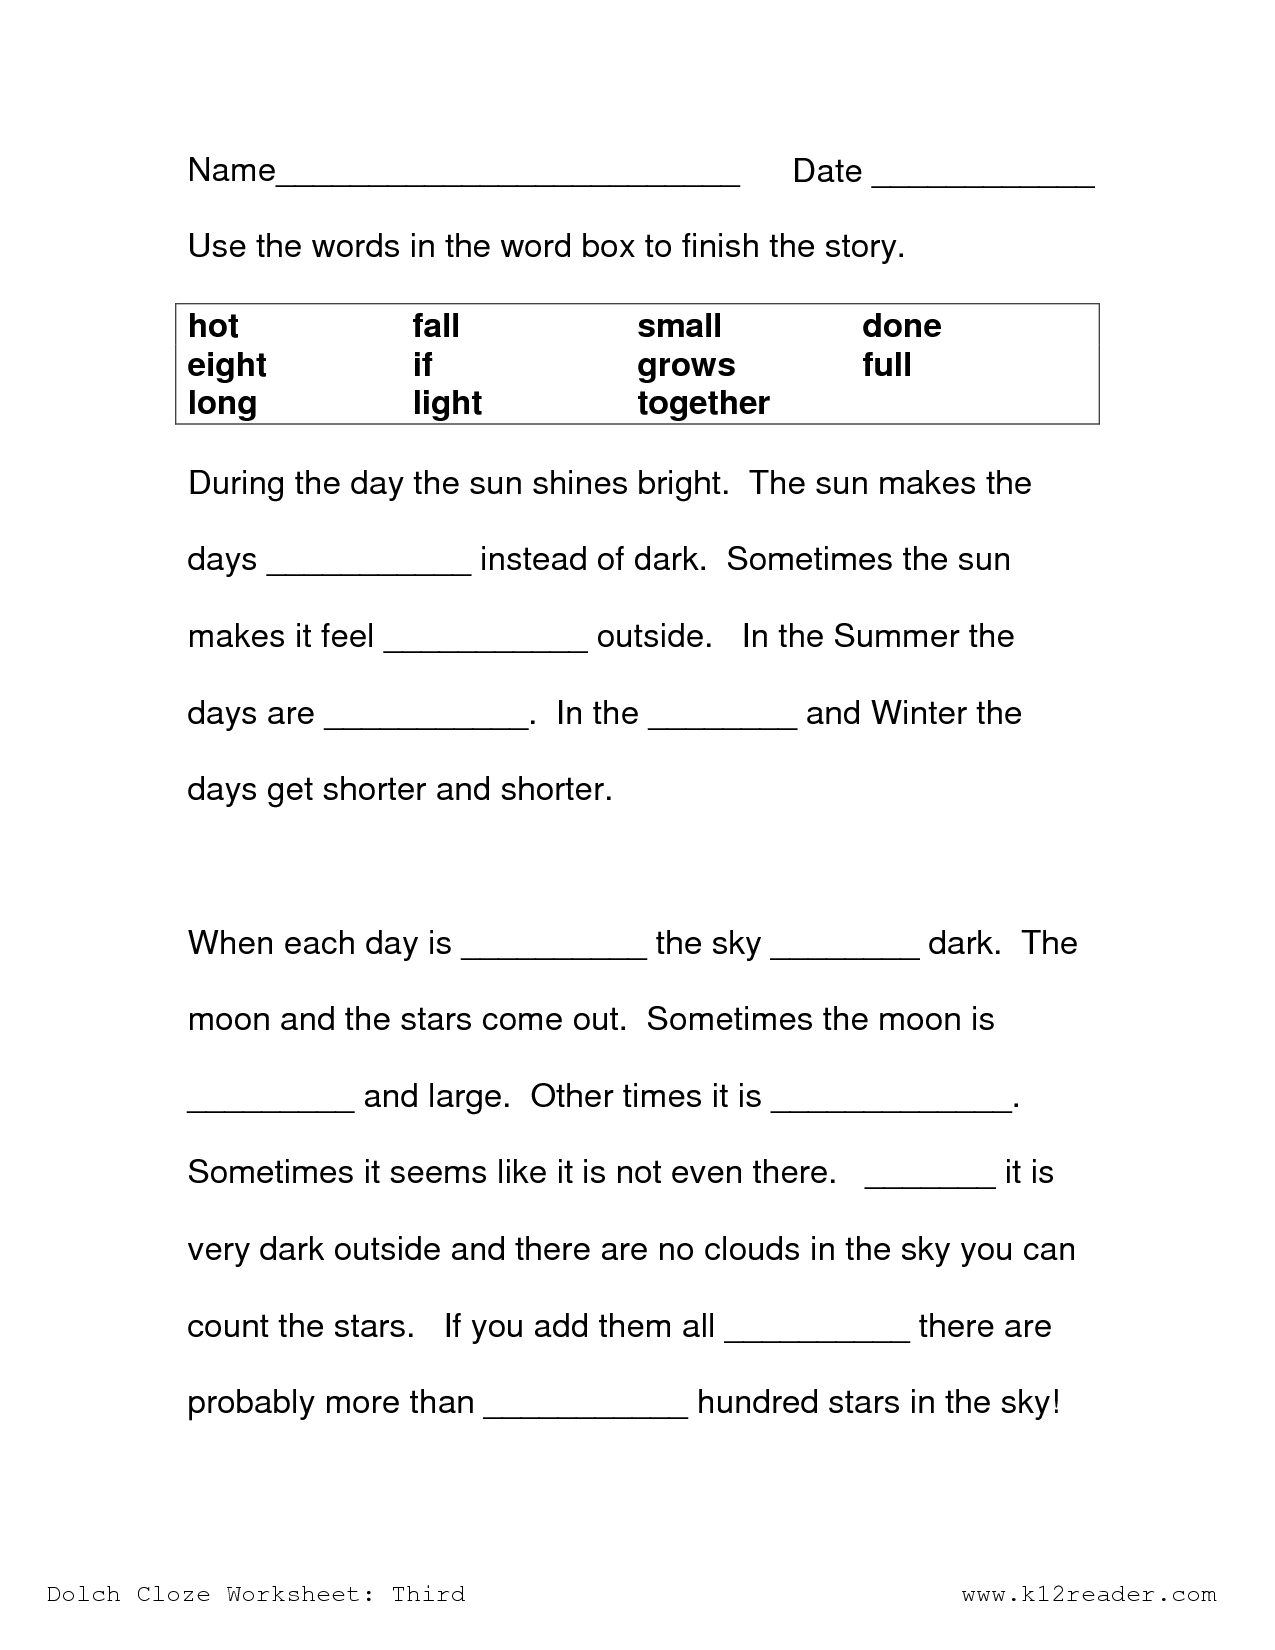 9-best-images-of-dolch-words-worksheets-dolch-sight-words-activity-worksheets-sight-word